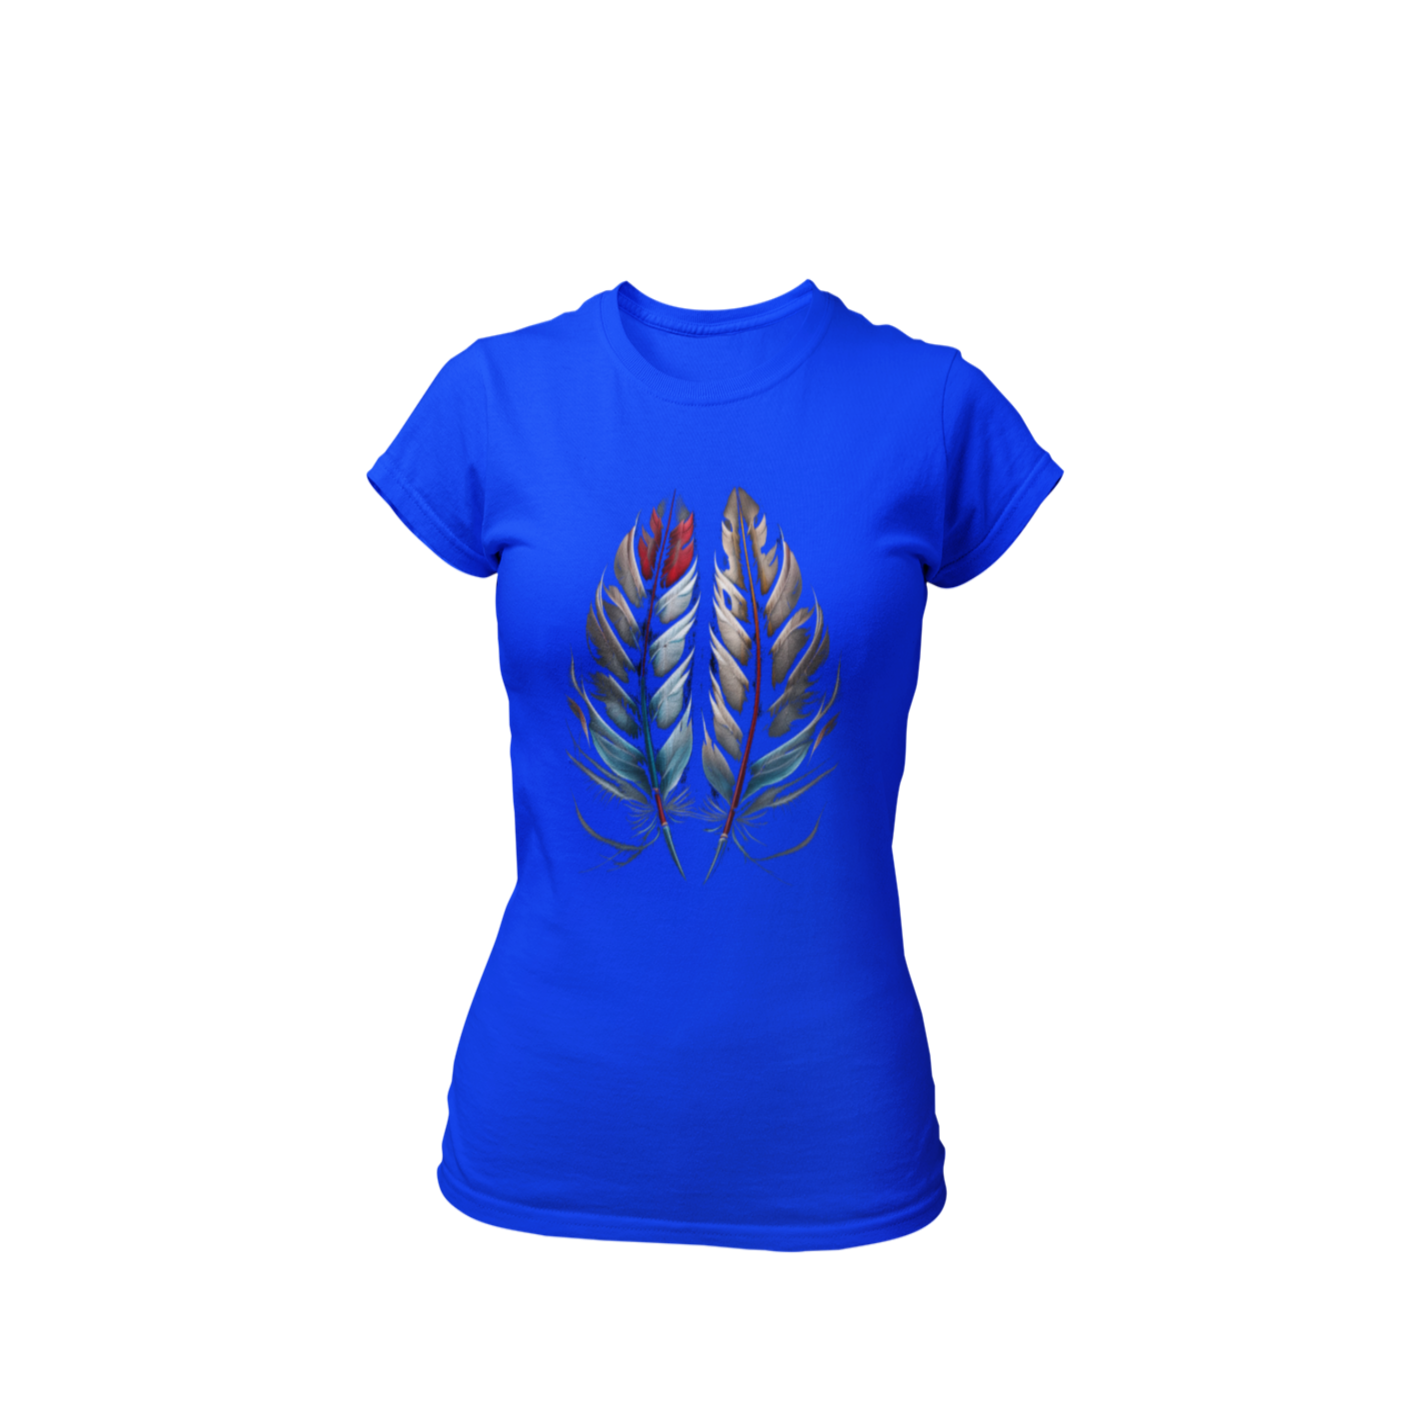 Image of a classic tee adorned with vibrant tribal feathers, crafted from the industry's favorite fabric. The slim cut offers a curvy silhouette, while the fine-gauge fabric ensures lightweight comfort for everyday wear.